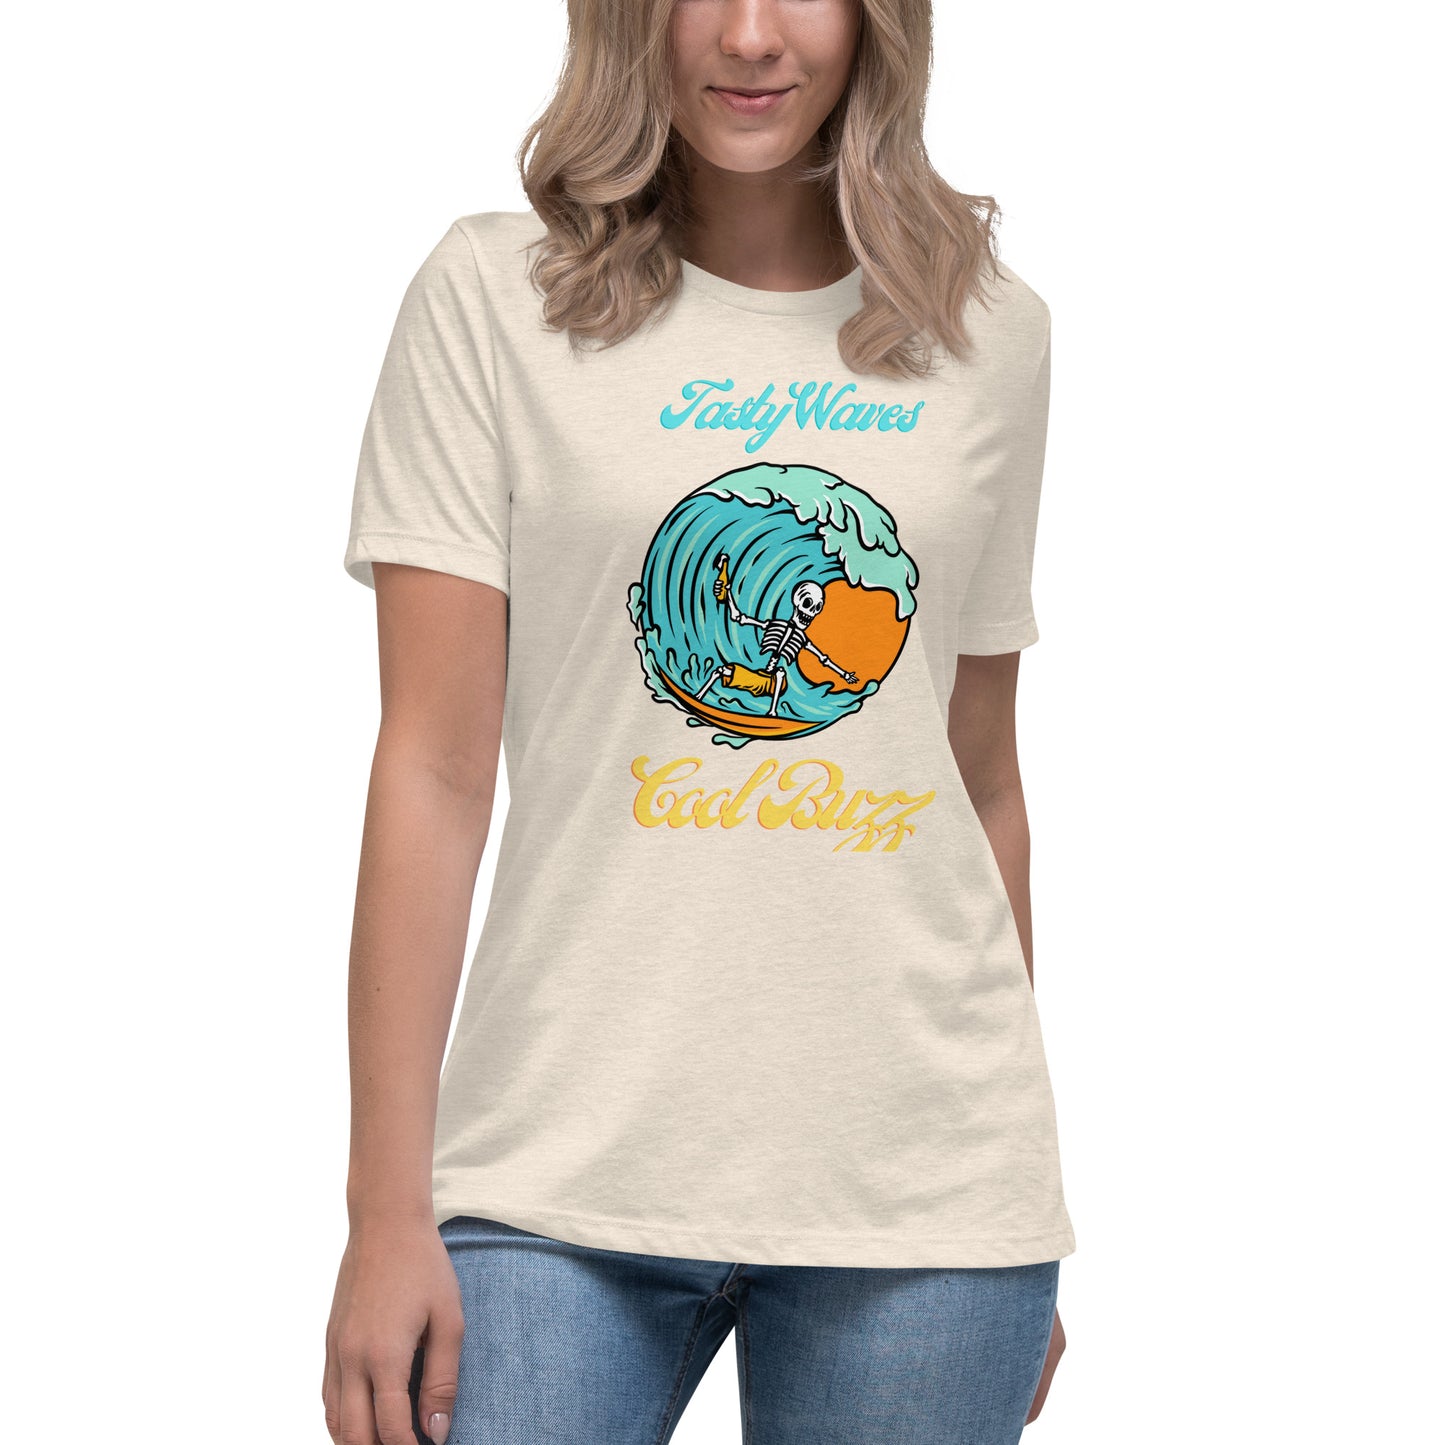 Tasty Waves Cool Buzz Women's Relaxed T-Shirt